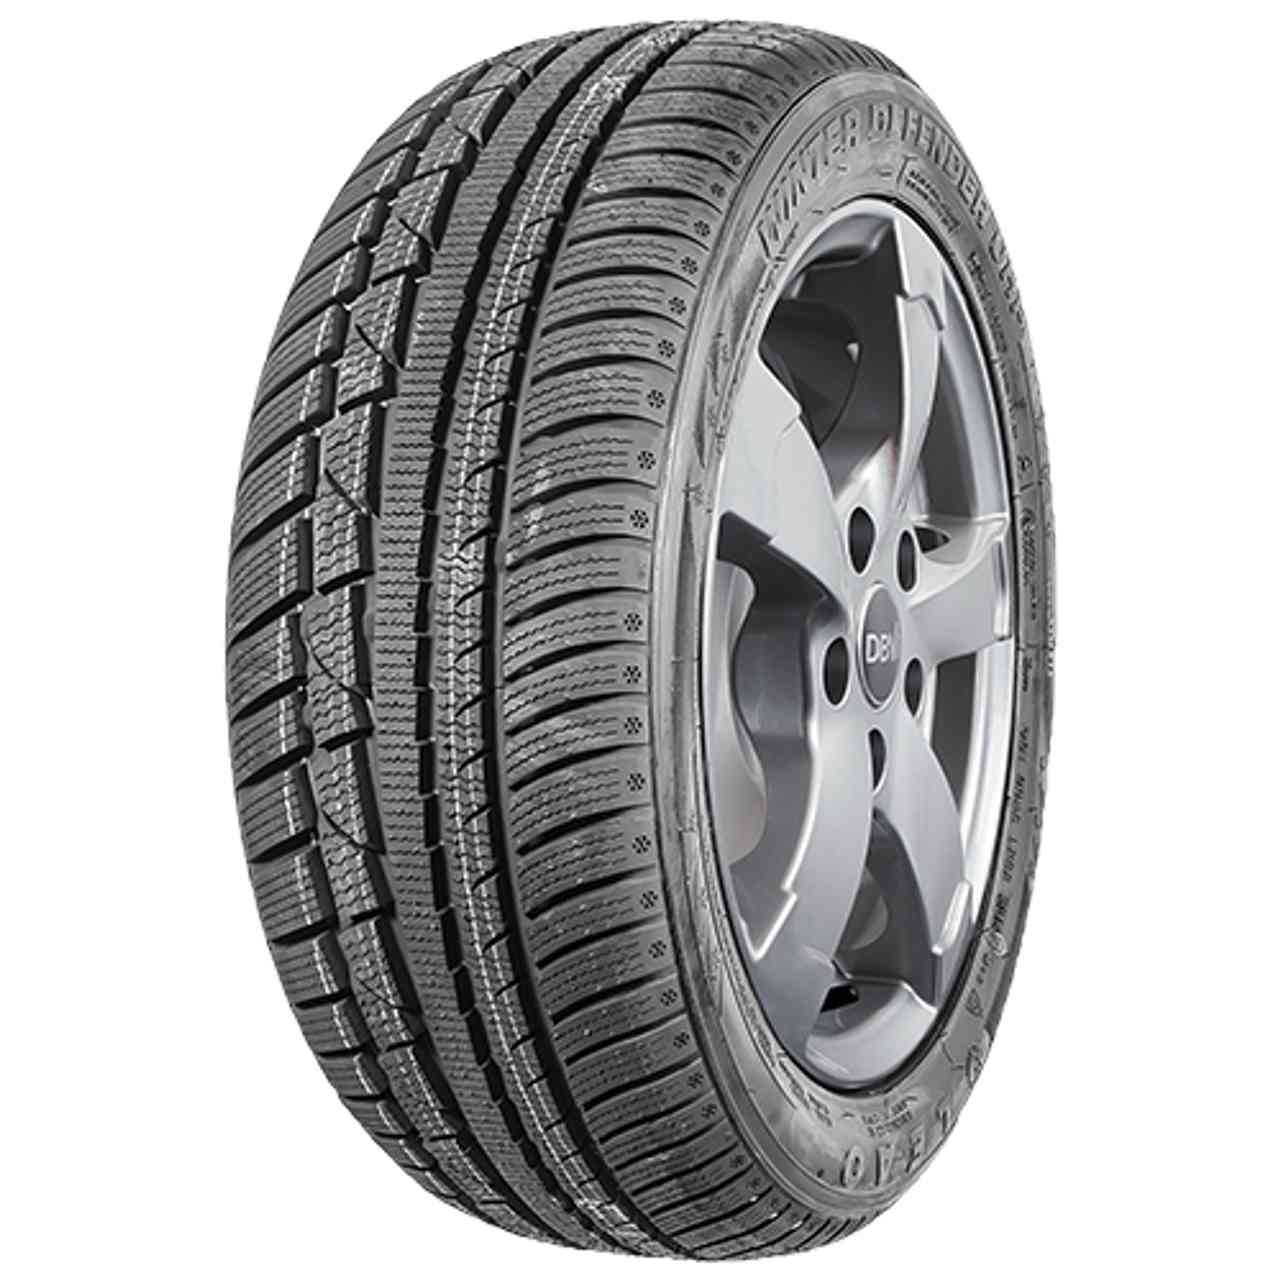 LEAO WINTER DEFENDER UHP 275/40R20 106V BSW XL